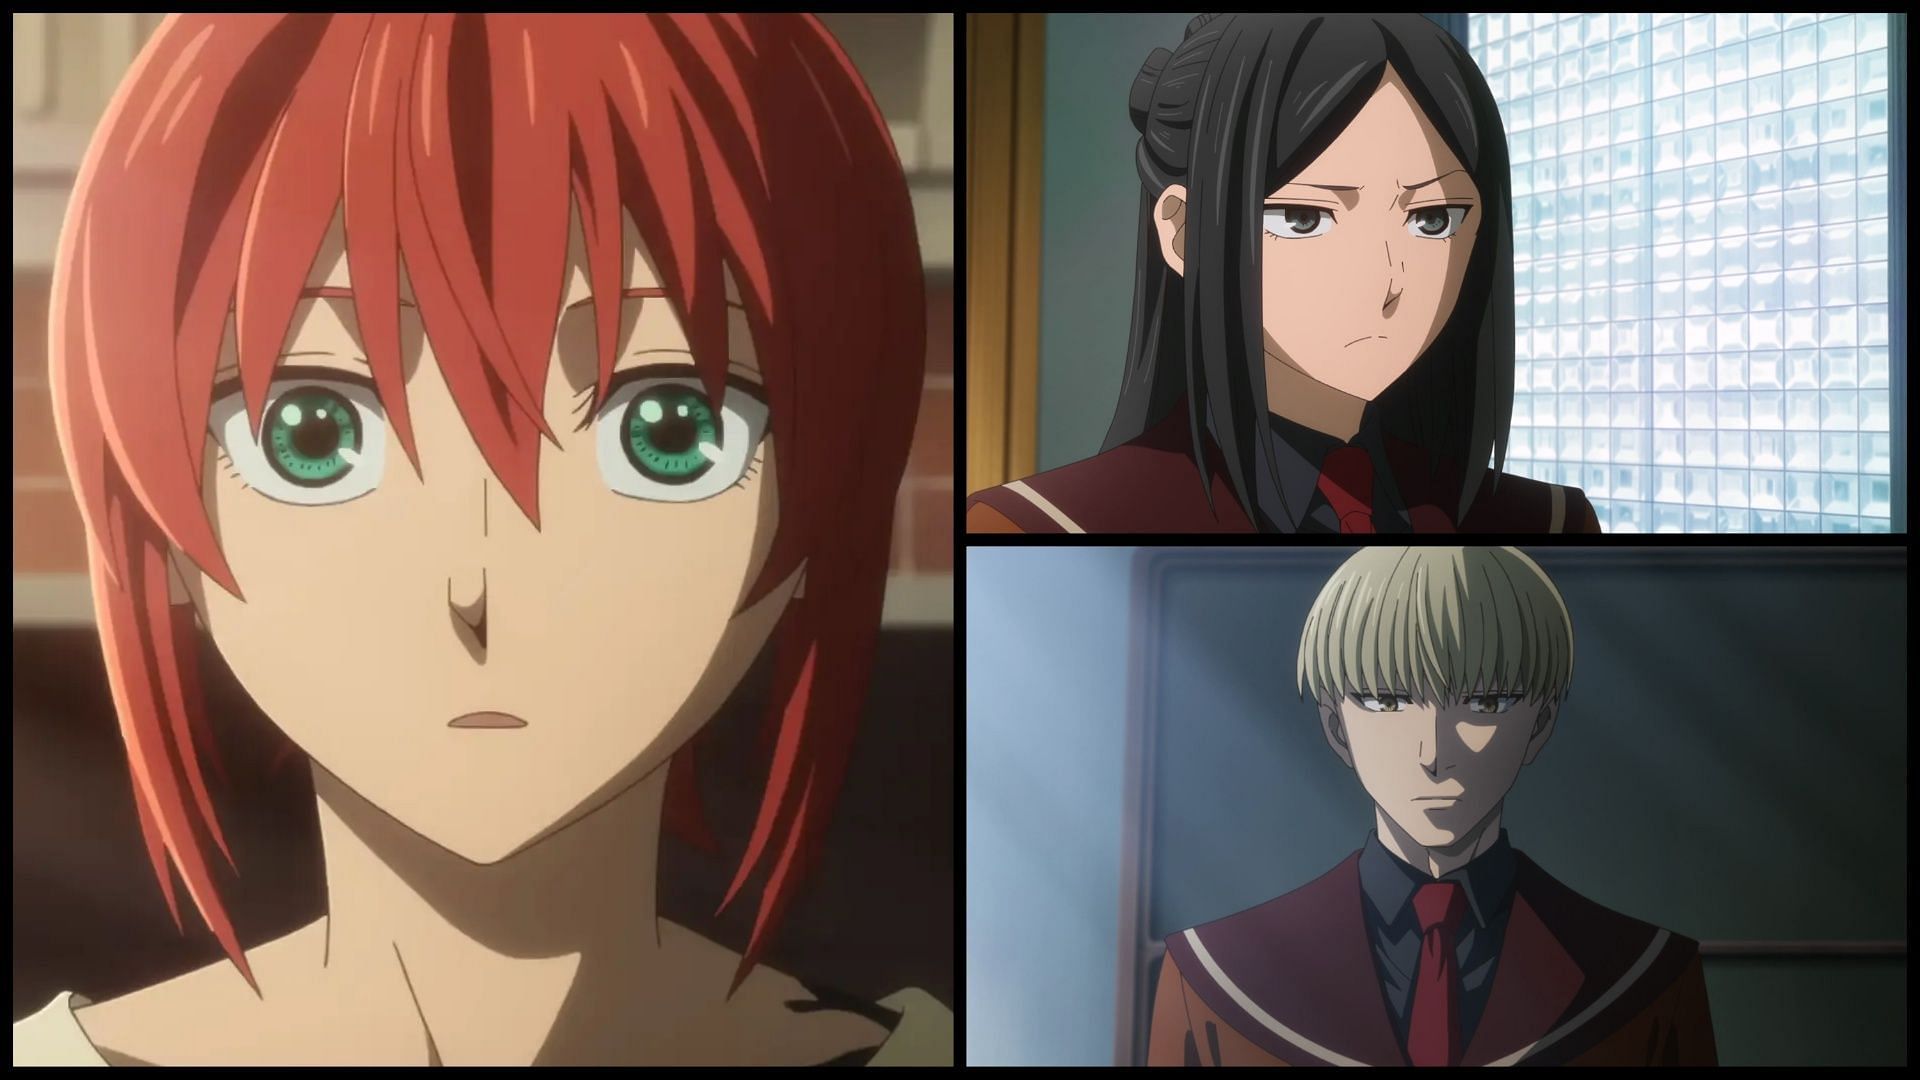 The Ancient Magus' Bride - Official Episode 8 Preview 